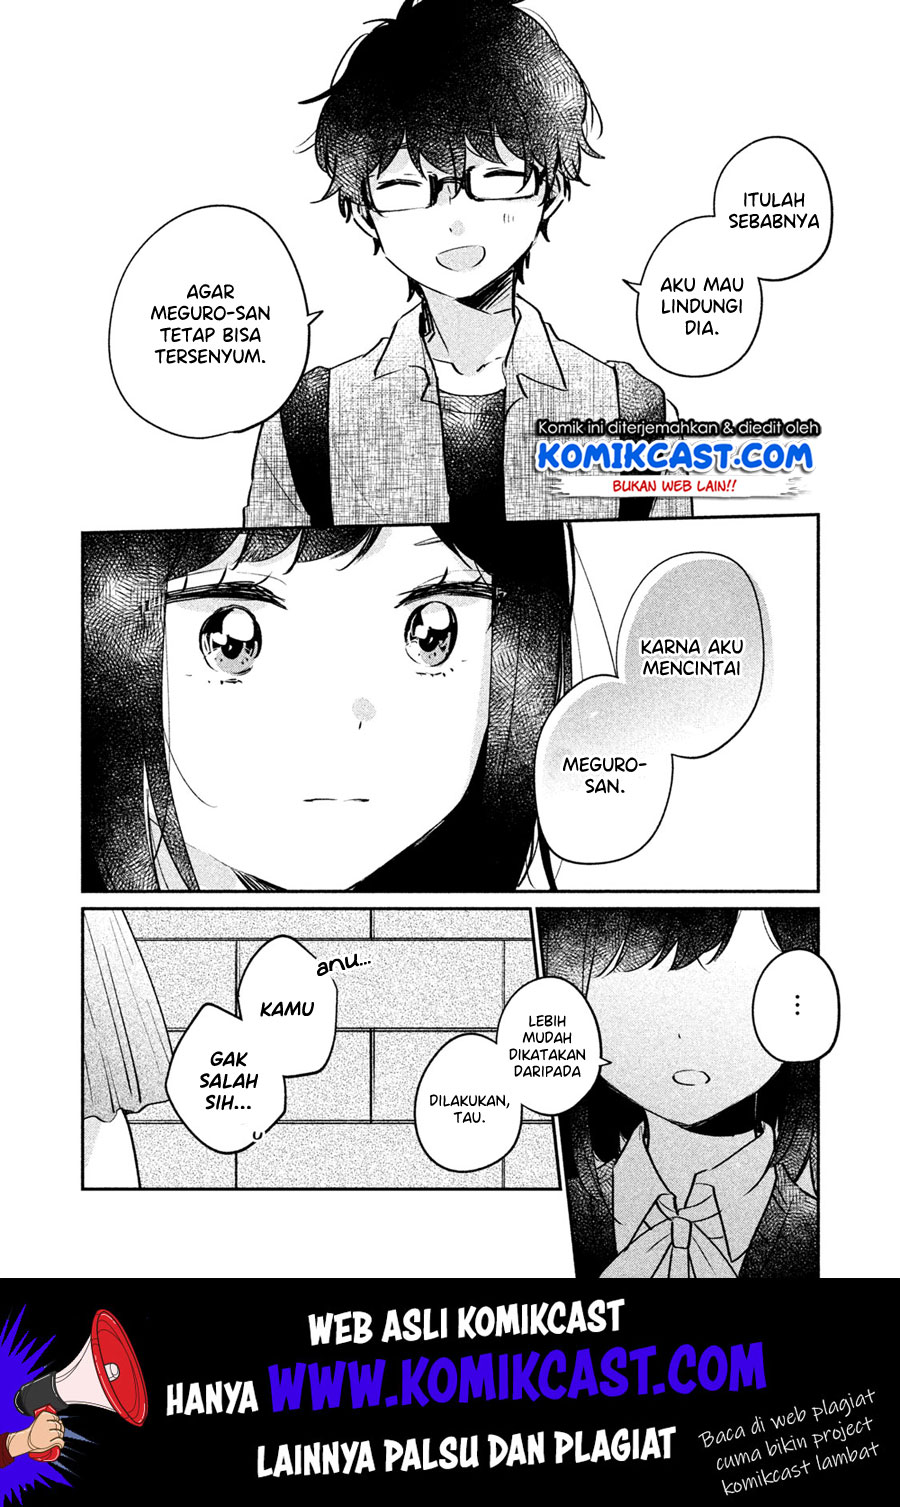 It’s Not Meguro-san’s First Time Chapter 16